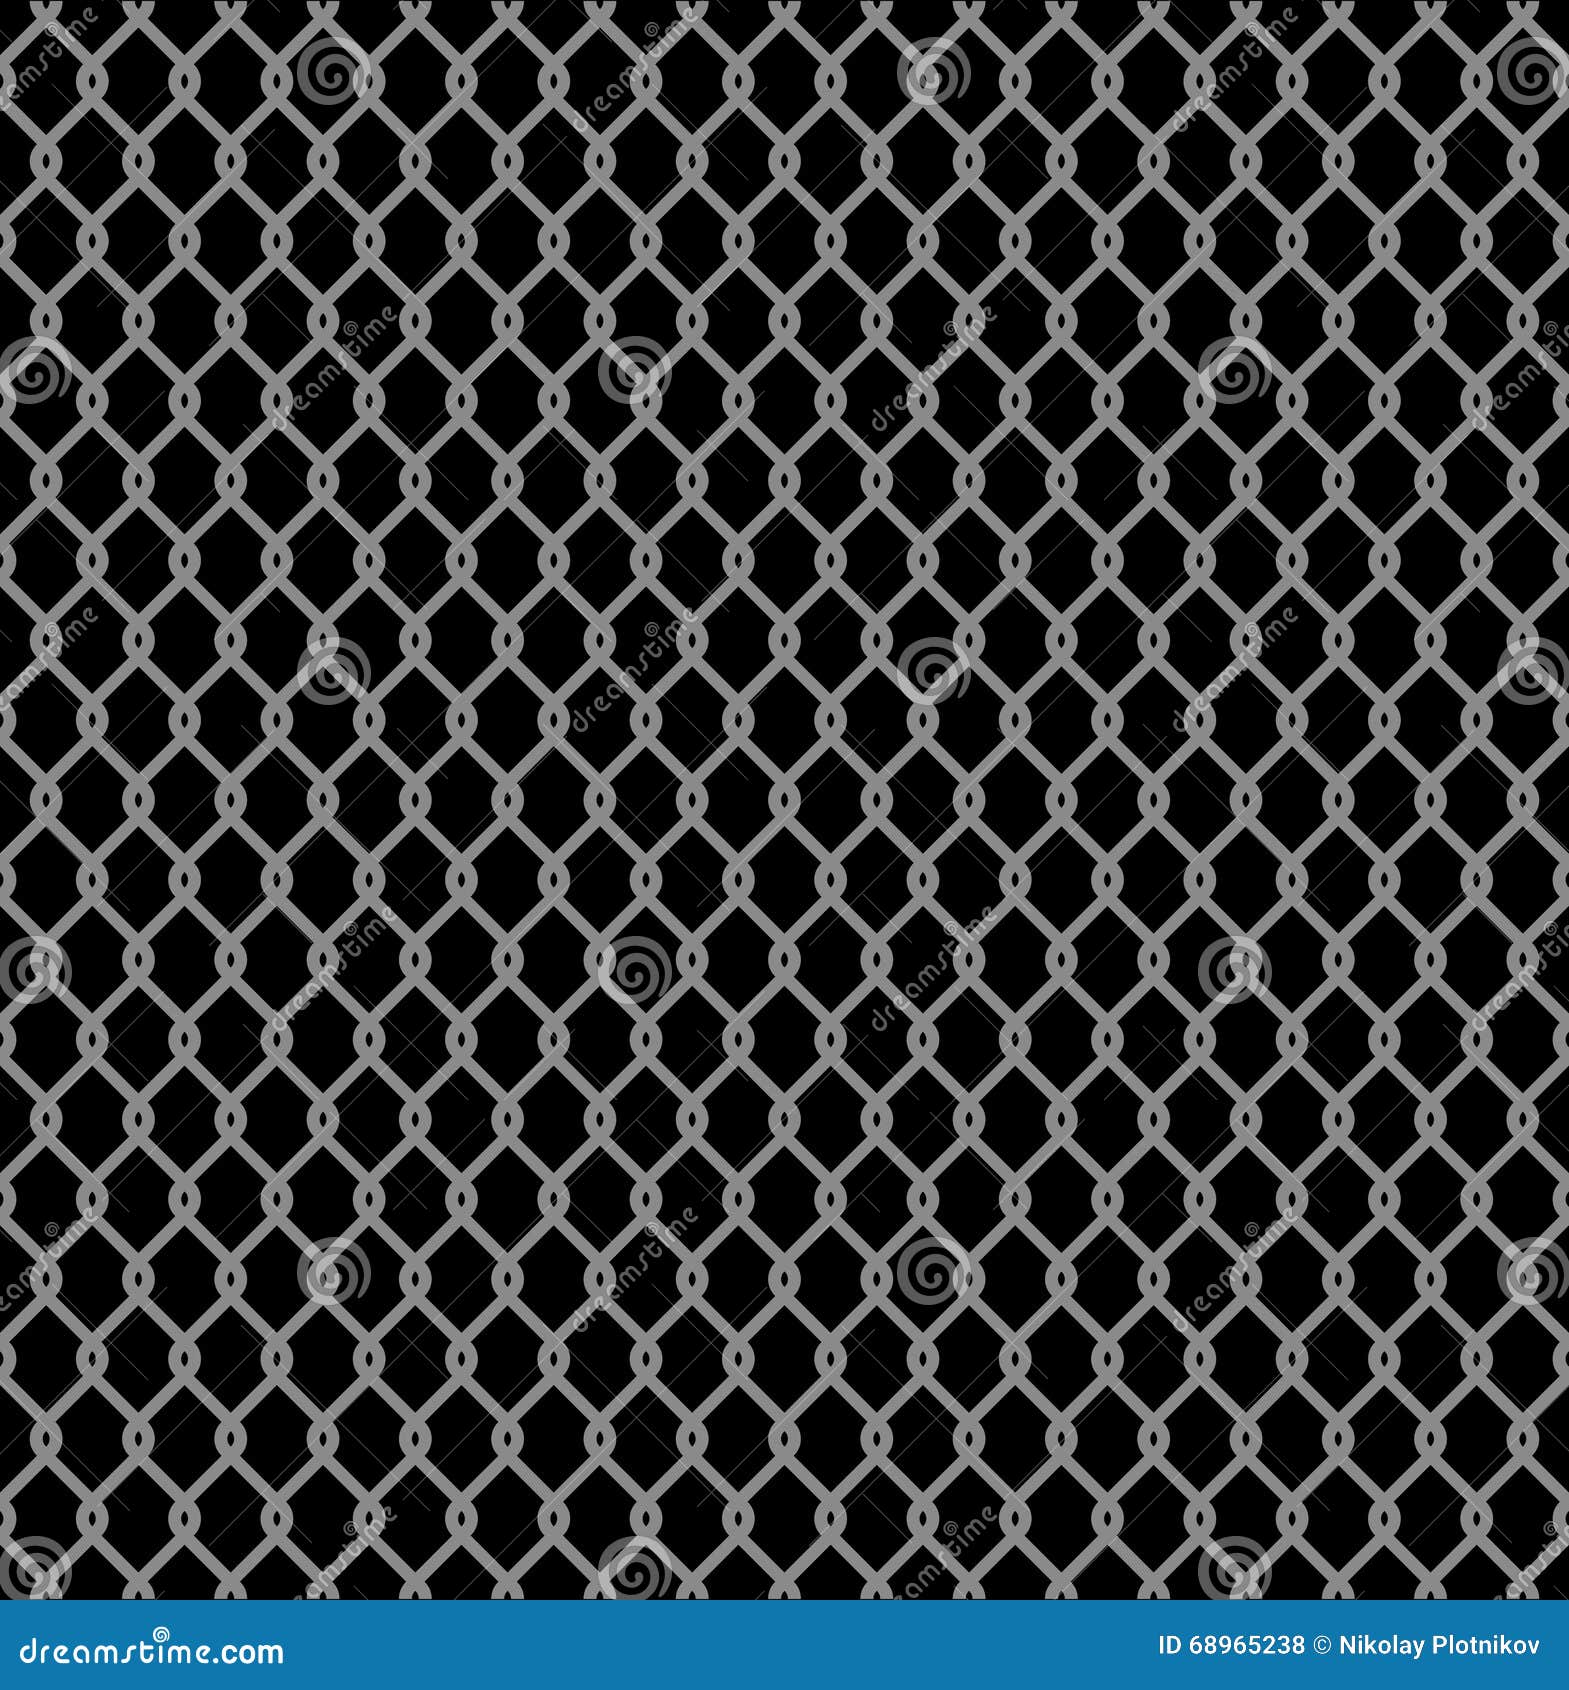 Metallic Wired Fence Seamless Pattern Isolated on Black Background. Steel  Wire Mesh. Vector Illustration Stock Vector - Illustration of black,  background: 68965238